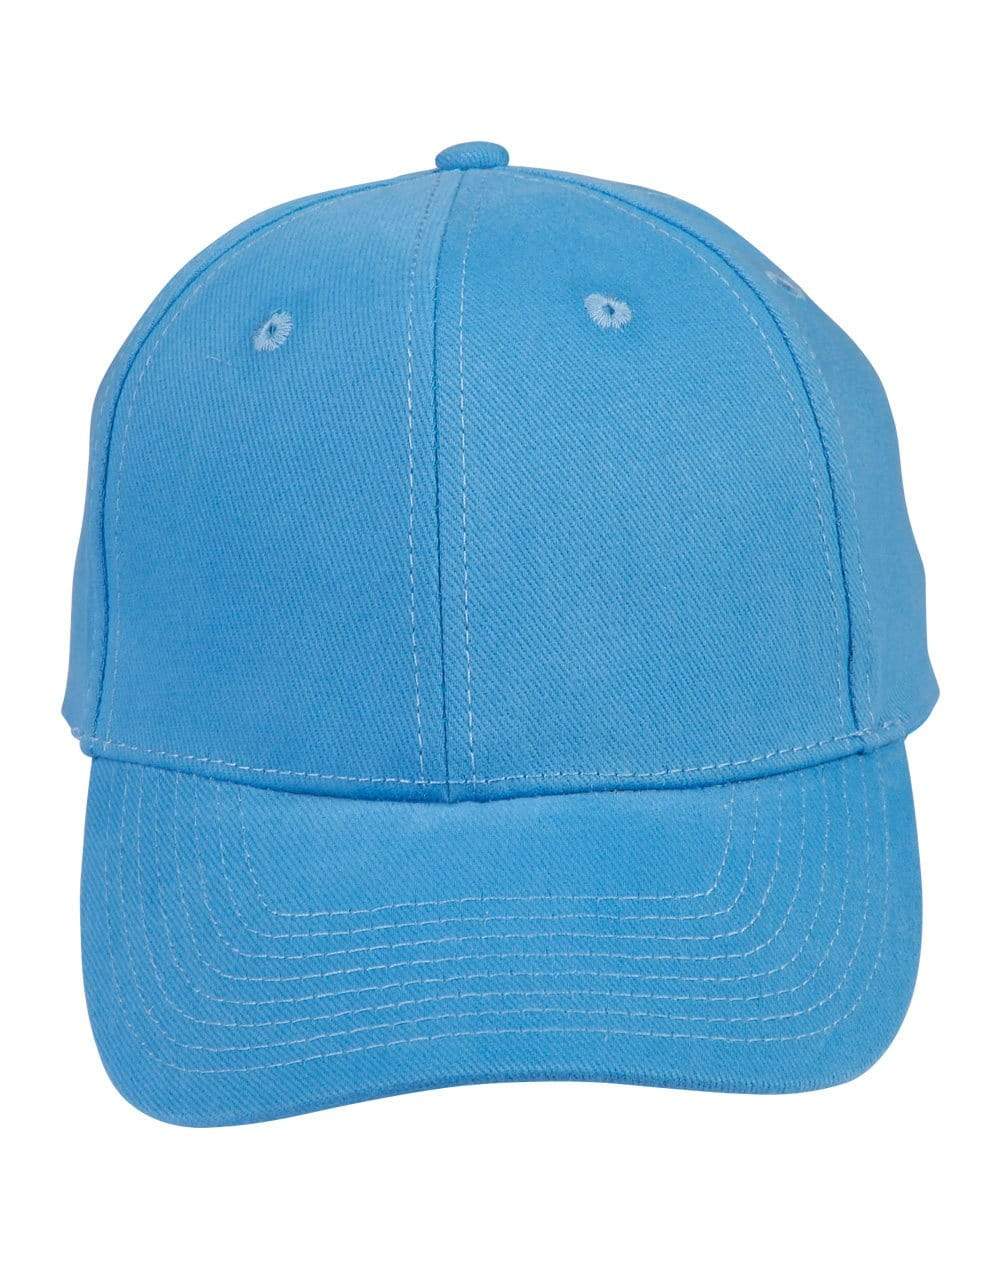 Heavy Brushed Cotton Cap Ch01 Active Wear Winning Spirit Sky Blue One size 